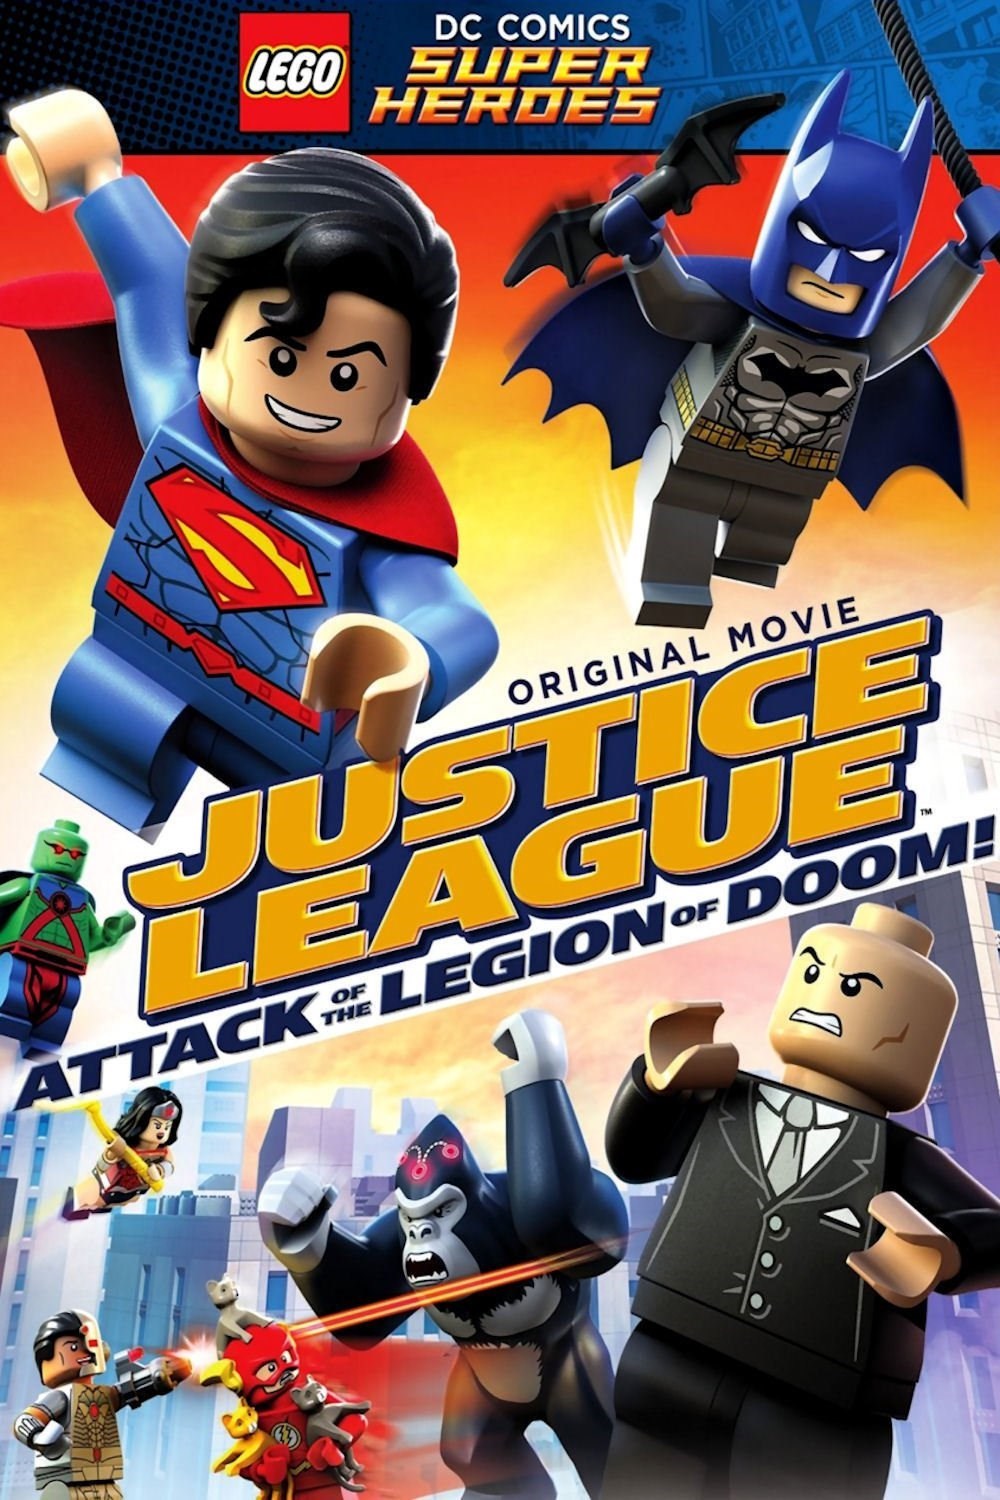 LEGO DC Super Heroes: Justice League - Attack of the Legion of Doom! (1 DVD Box Set)